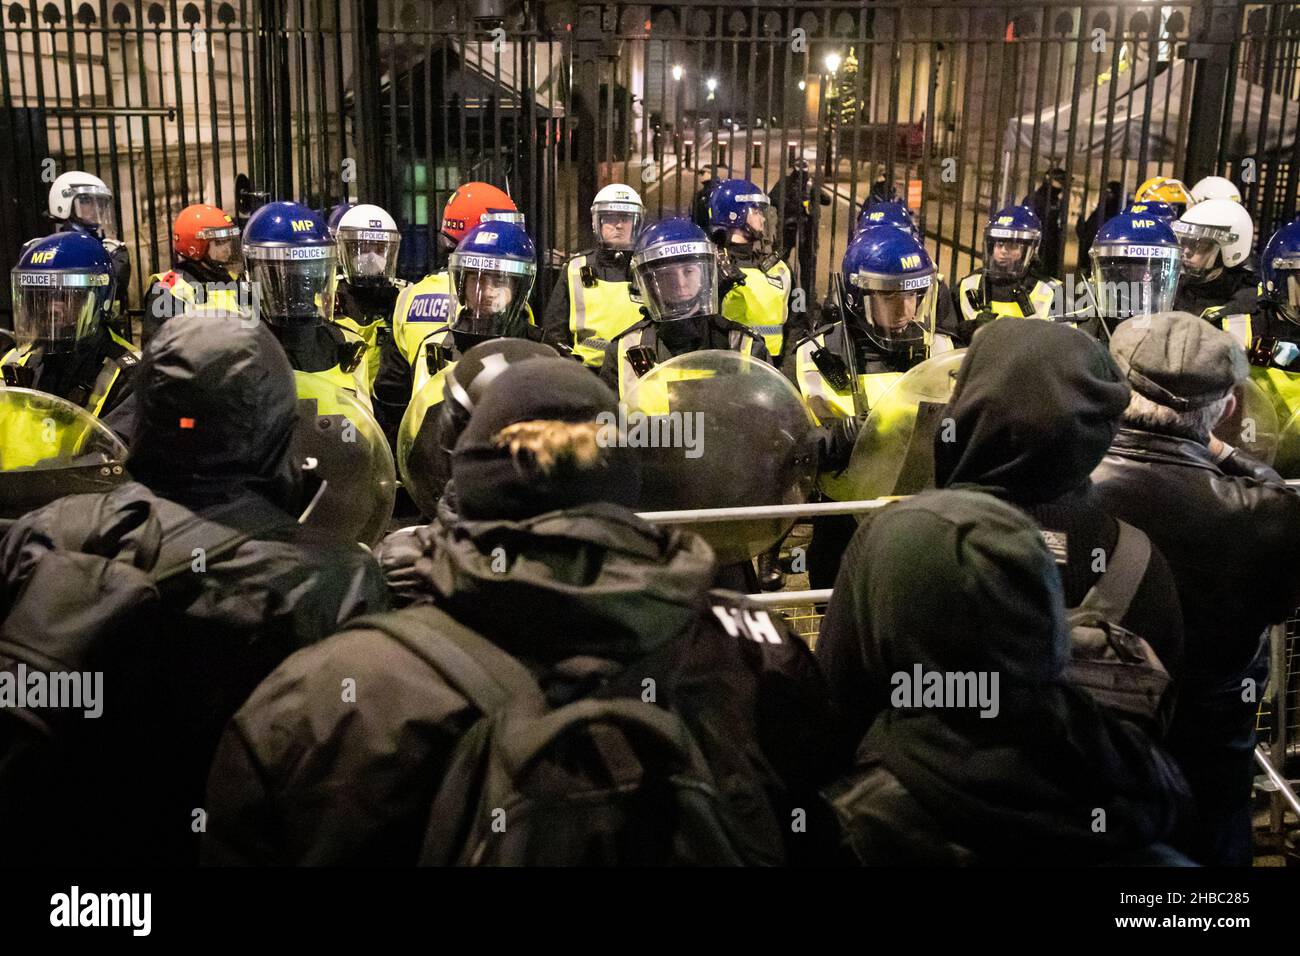 London, UK. 18th Dec, 2021. People gather outside Downing Street to protest against the latest COVID19 restrictions. Protesters unite for freedom and march through the city to show the government that they do not have faith in their leadership. Credit: Andy Barton/Alamy Live News Stock Photo